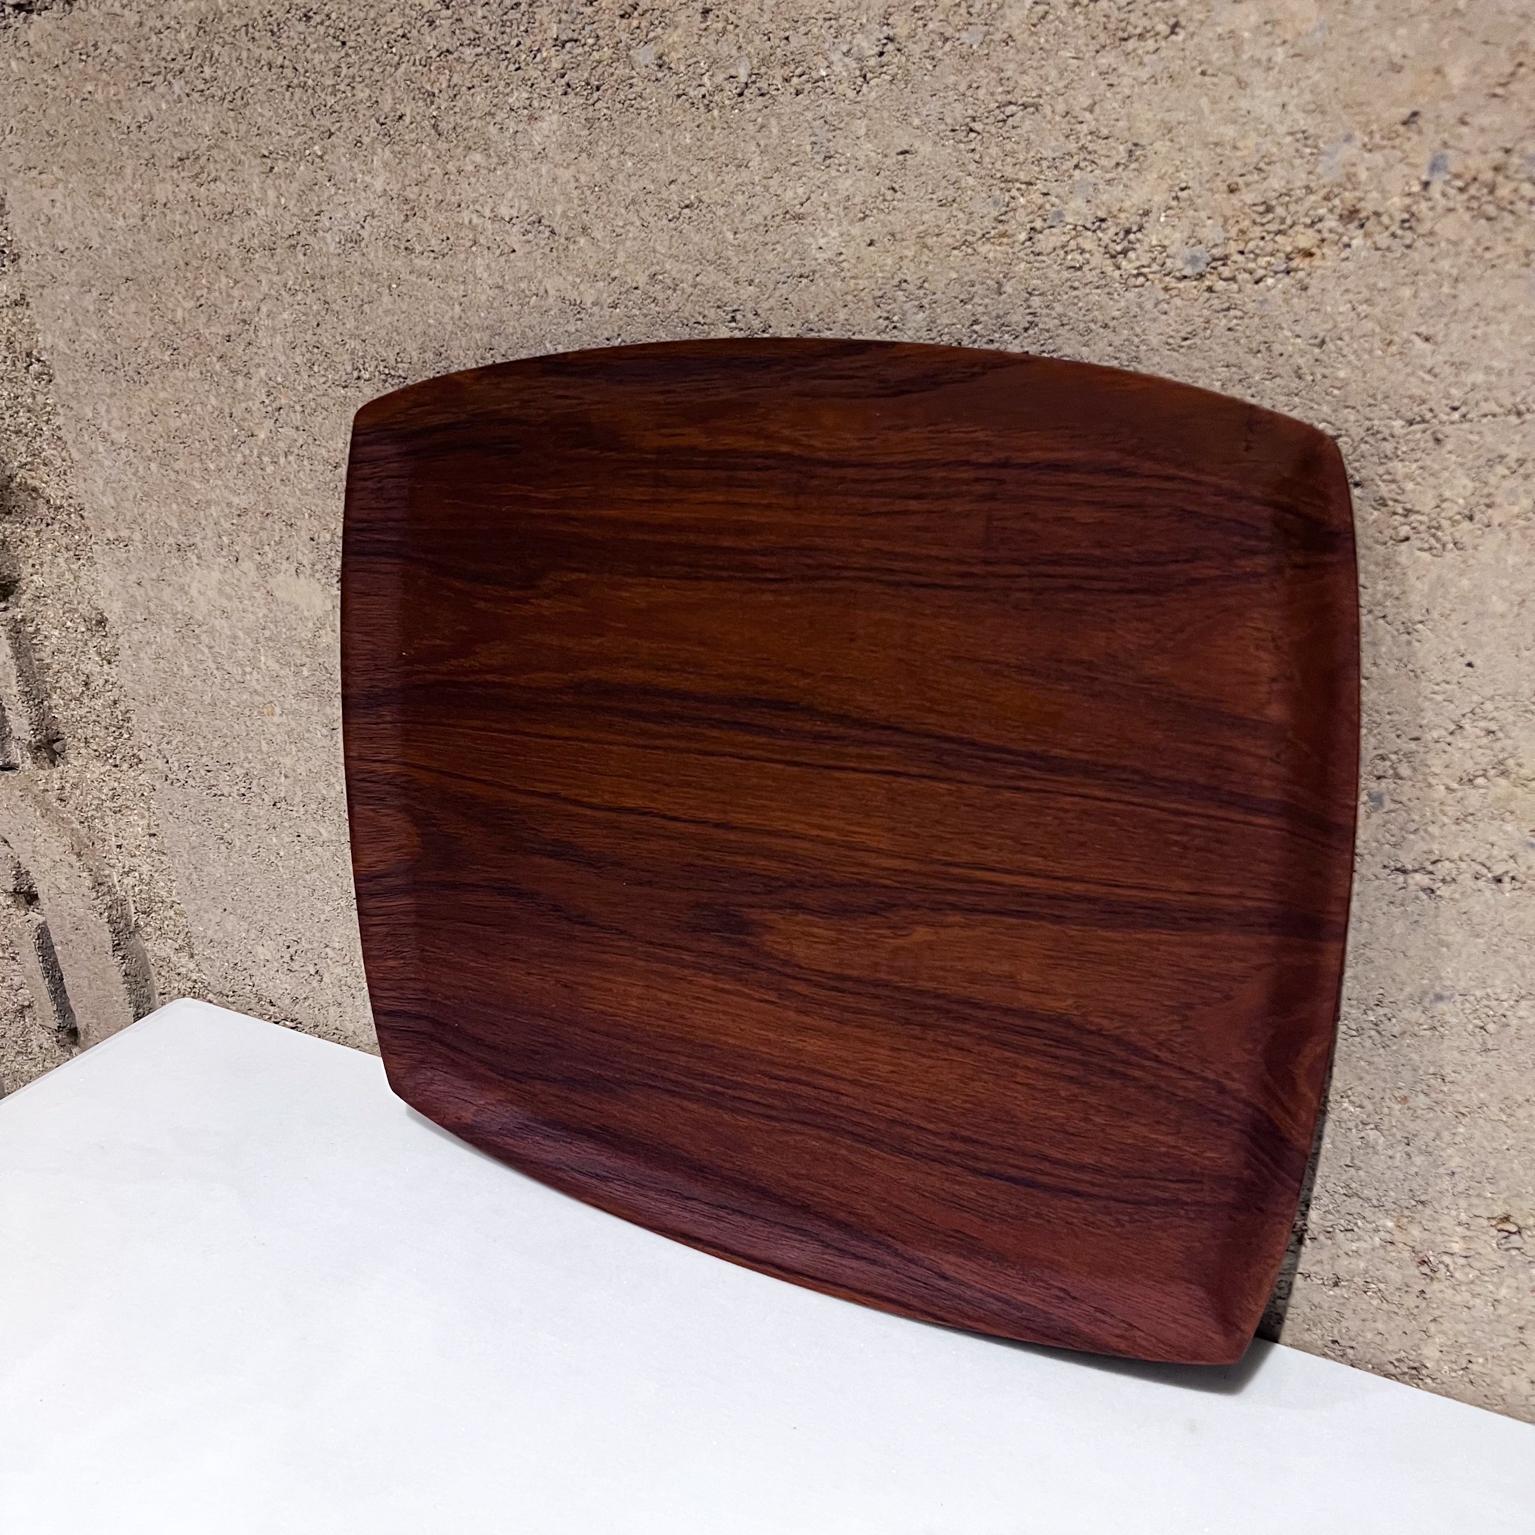 1960s Wood Teak Tray from Sweden Style Jens Quistgaard For Sale 1